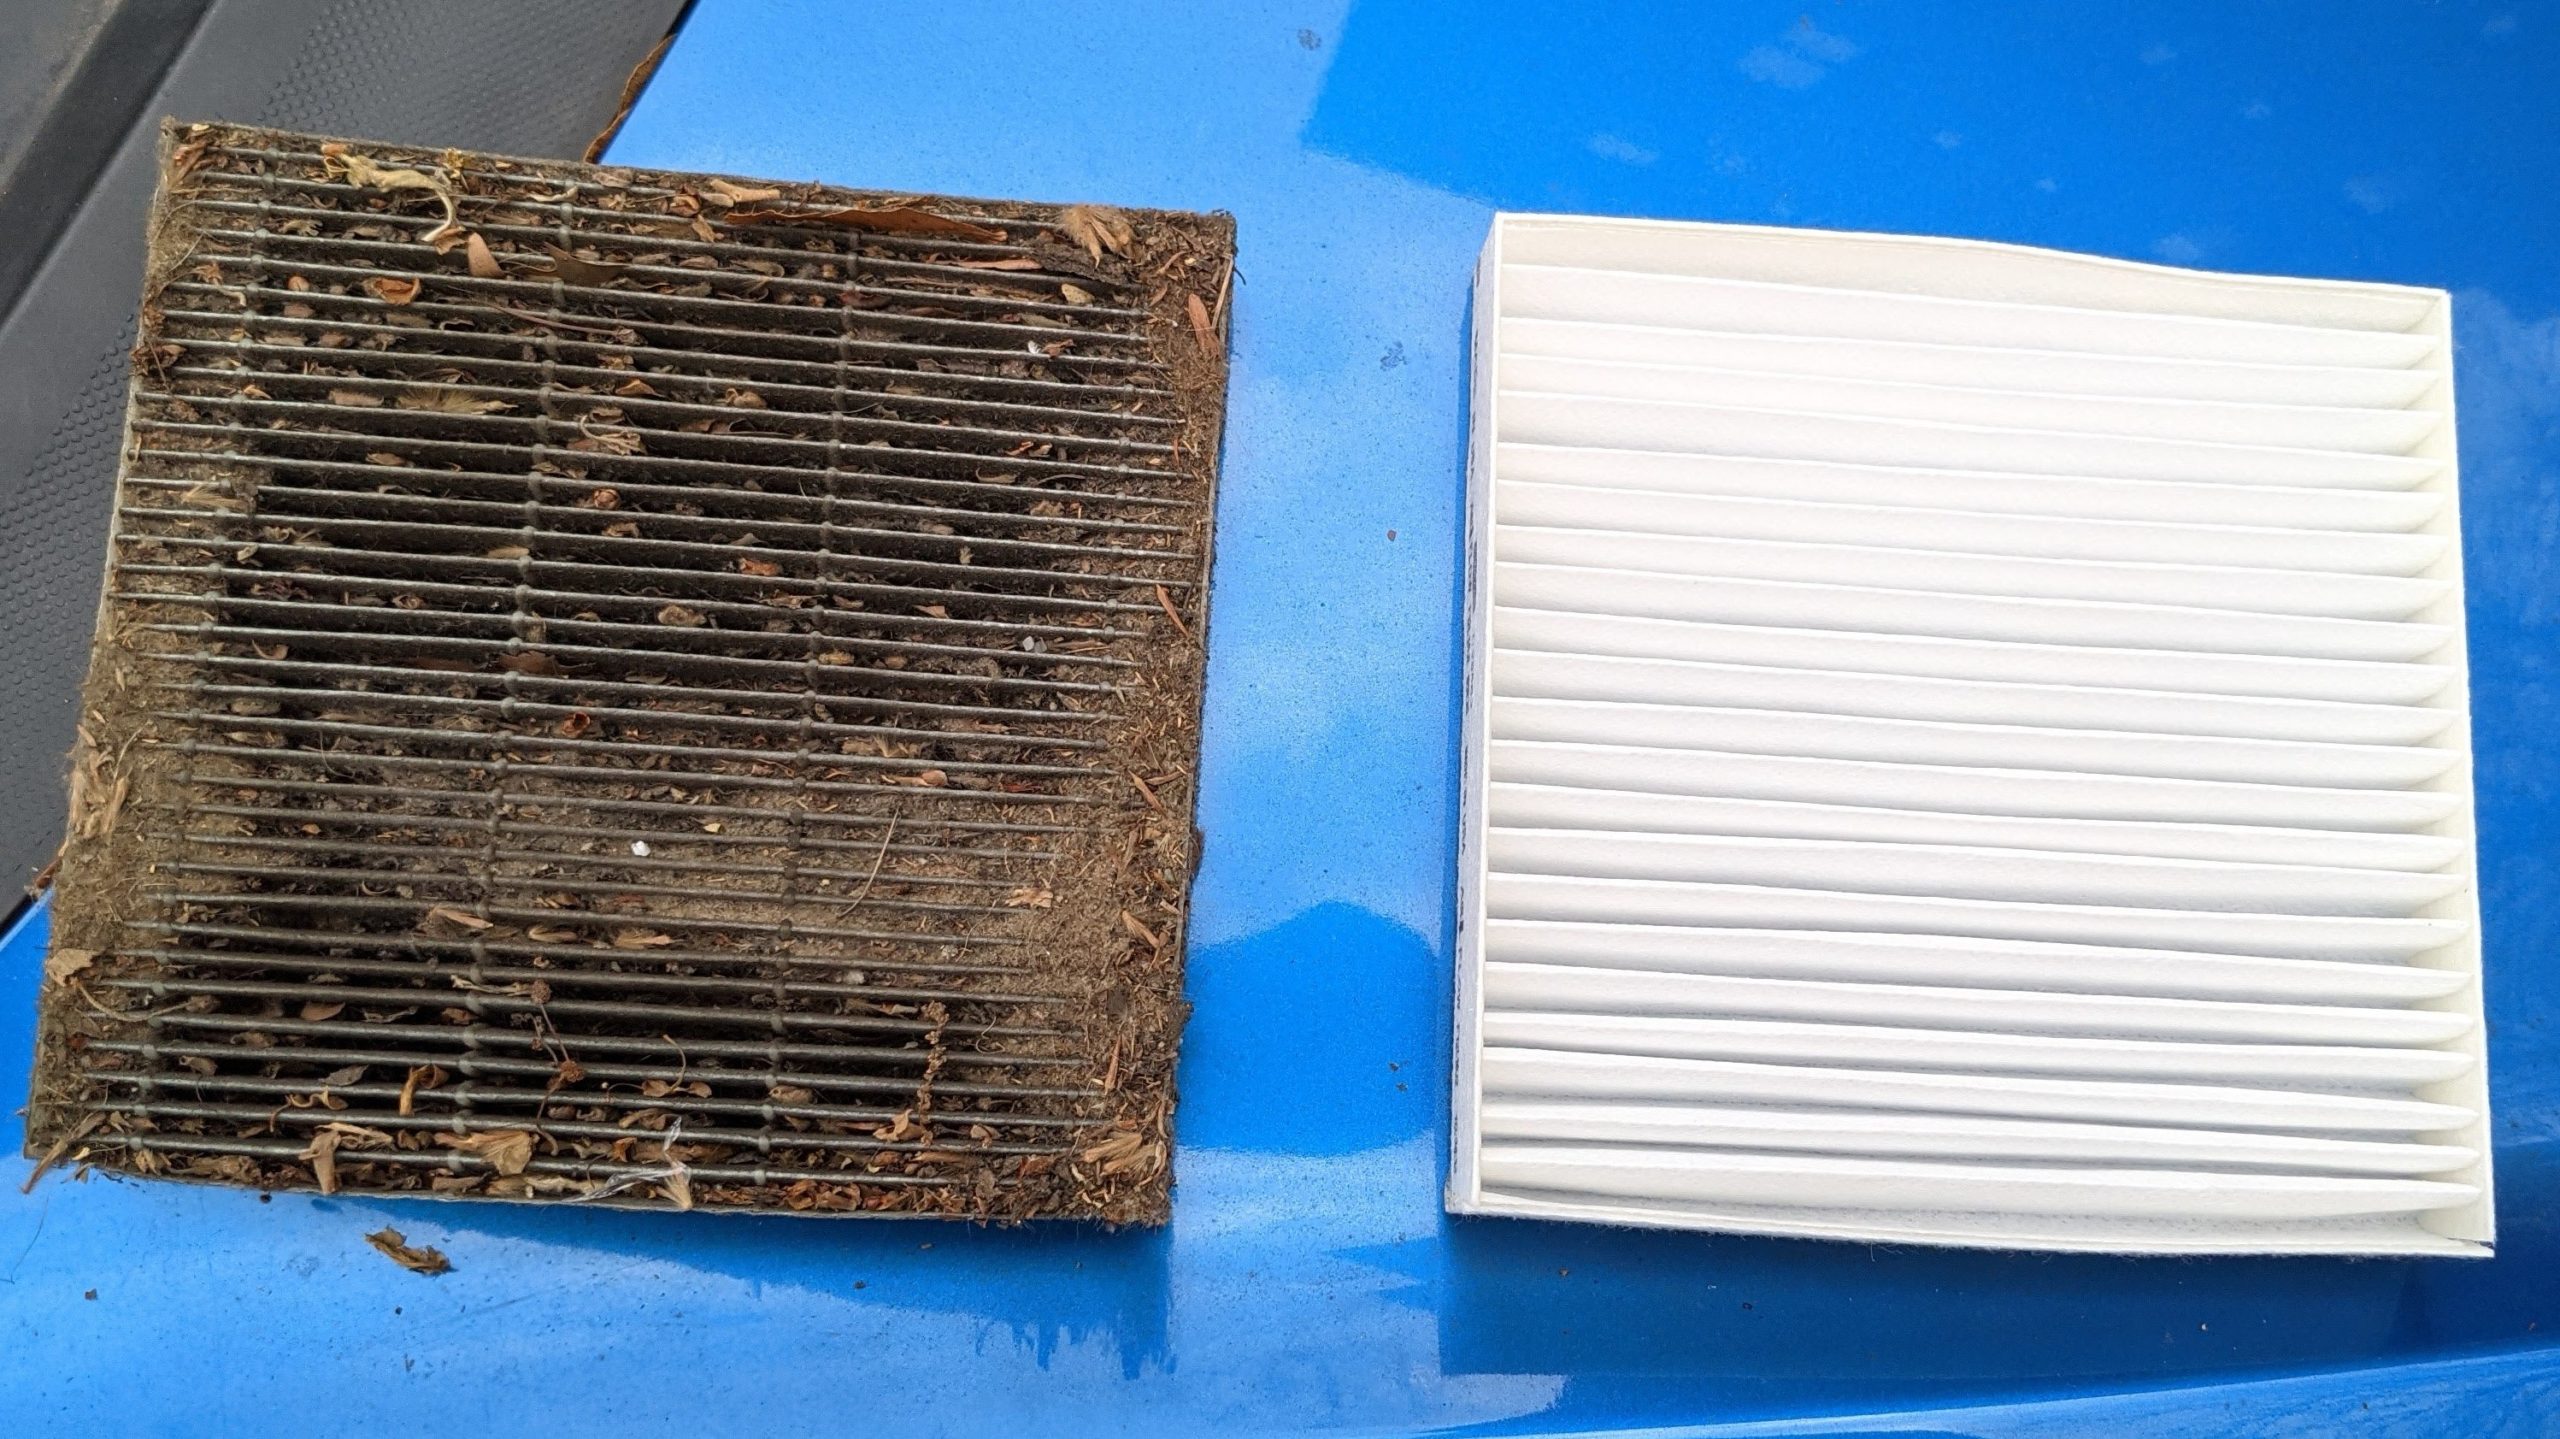 I Finally Changed The Cabin Air Filter In My Car And It Was Just The Filthiest Goddamn Thing